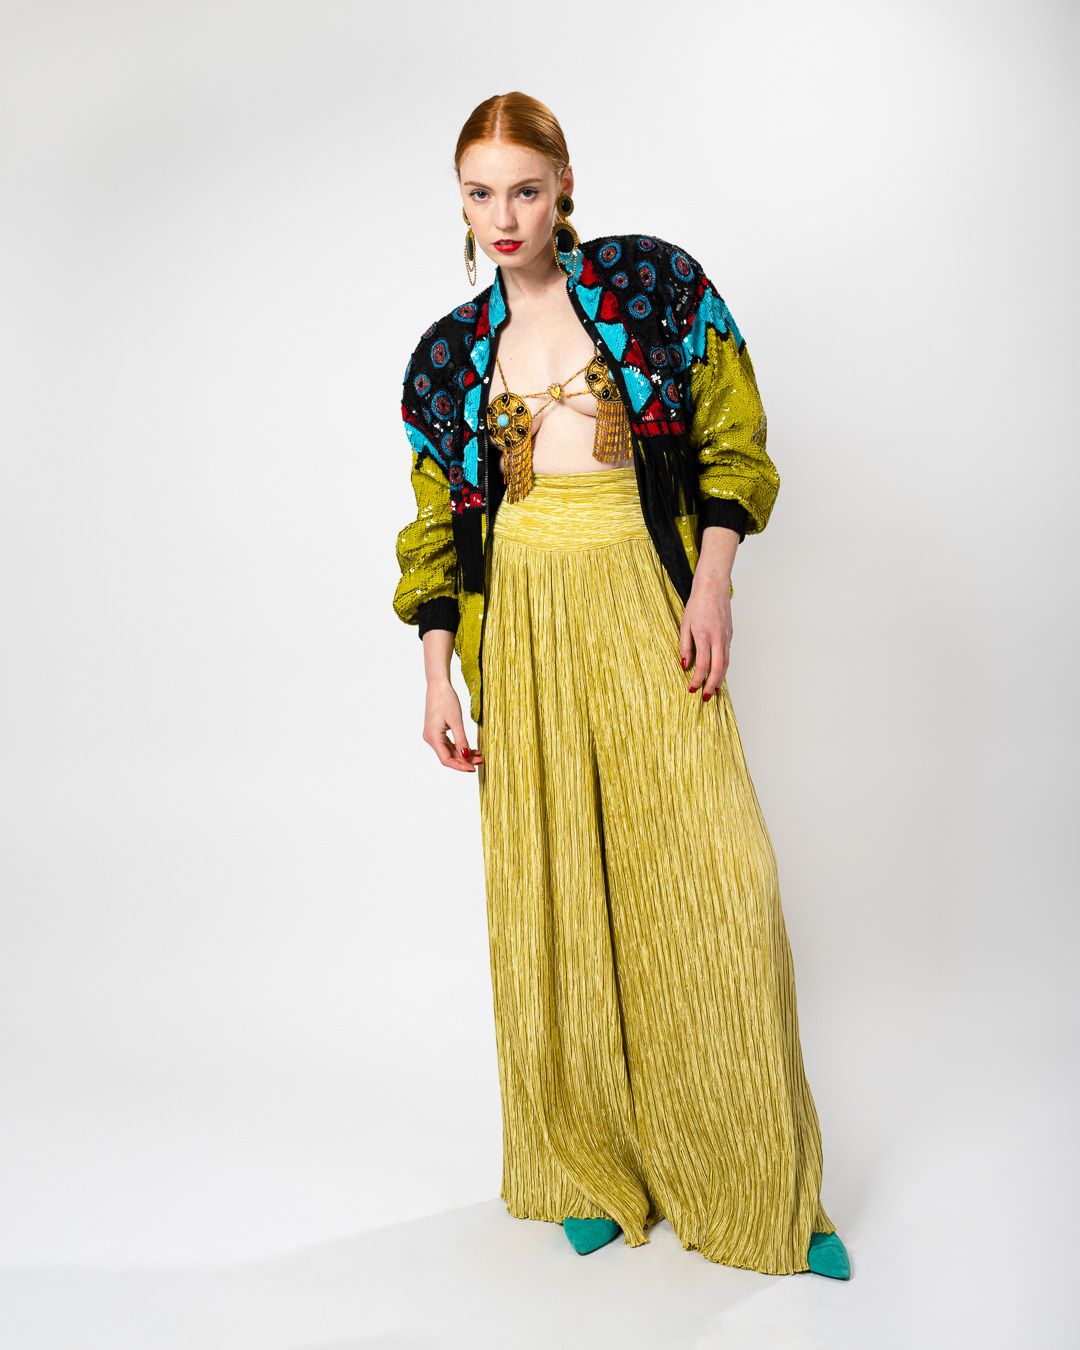 Emily O'Dette in Mary Mcfadden Couture Palazzo Pants, Modi Sequin Jacket, Filigree Medallion Harness